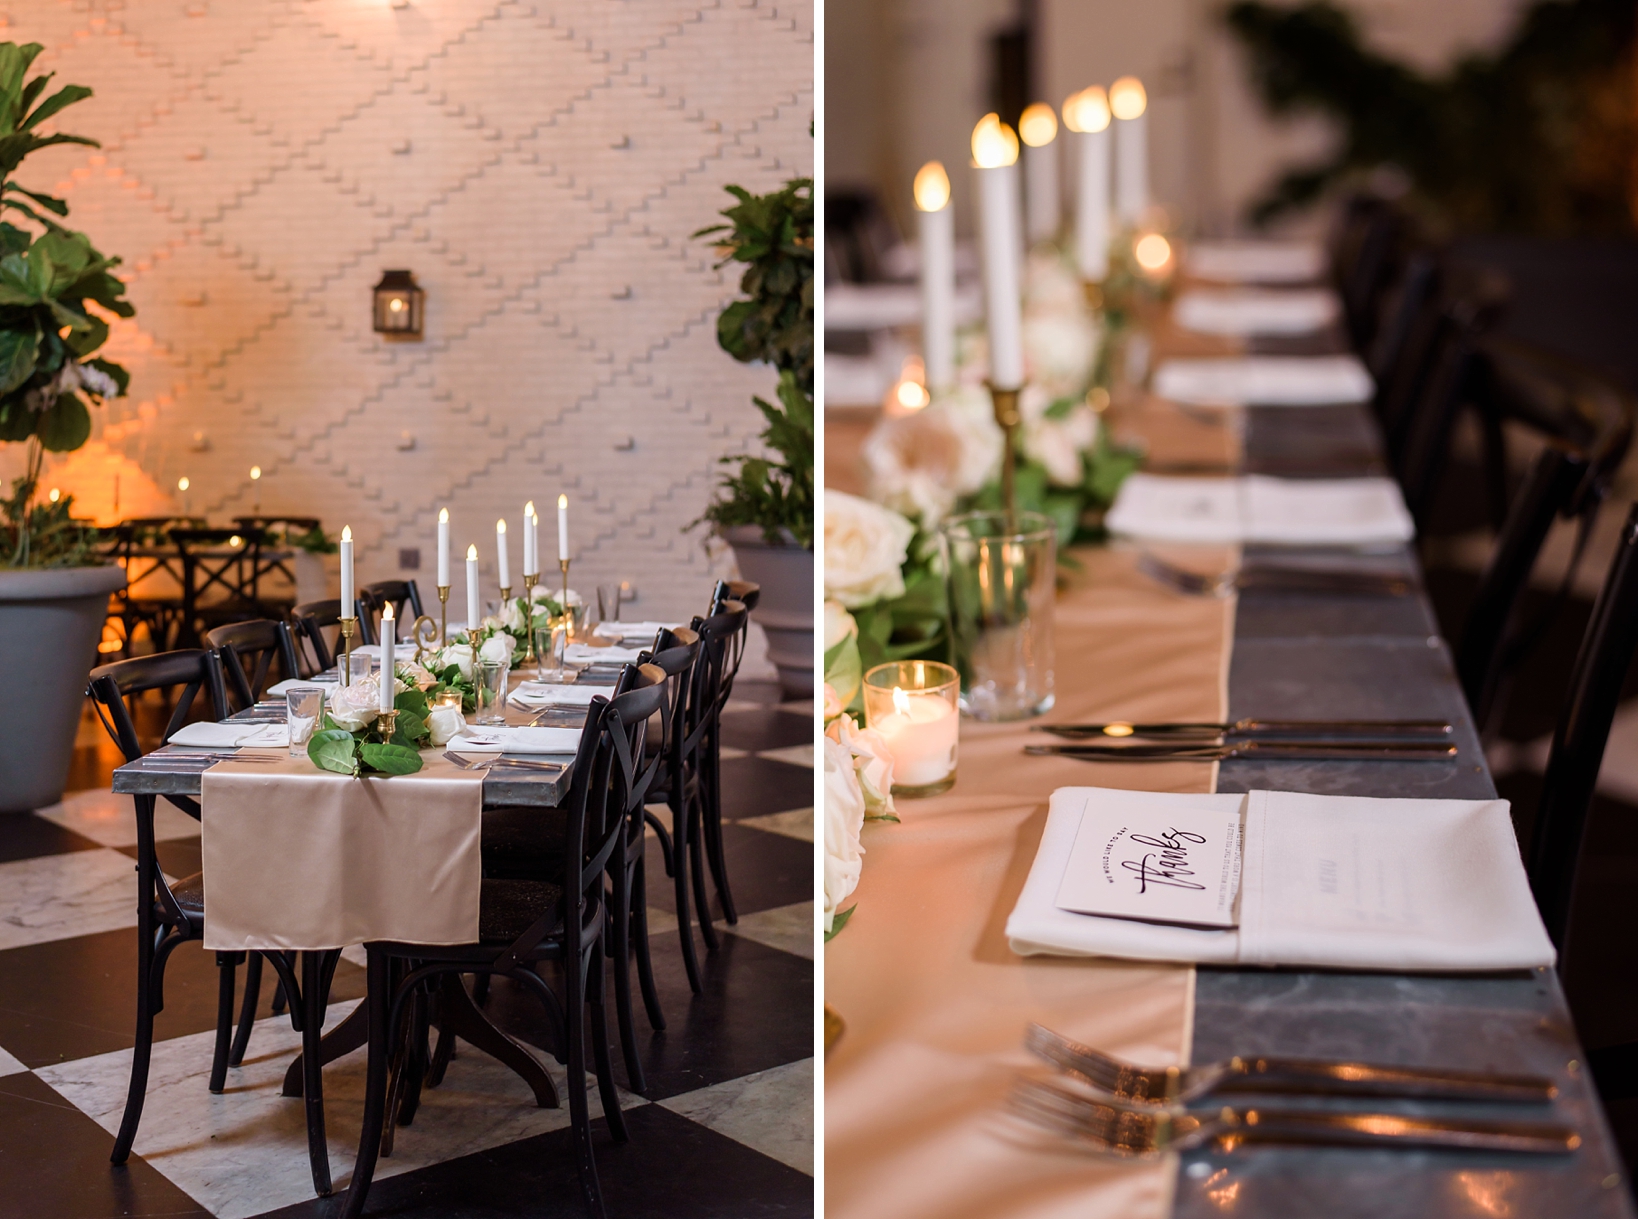 The reception space was beautiful with warm uplighting and floral tablerunners